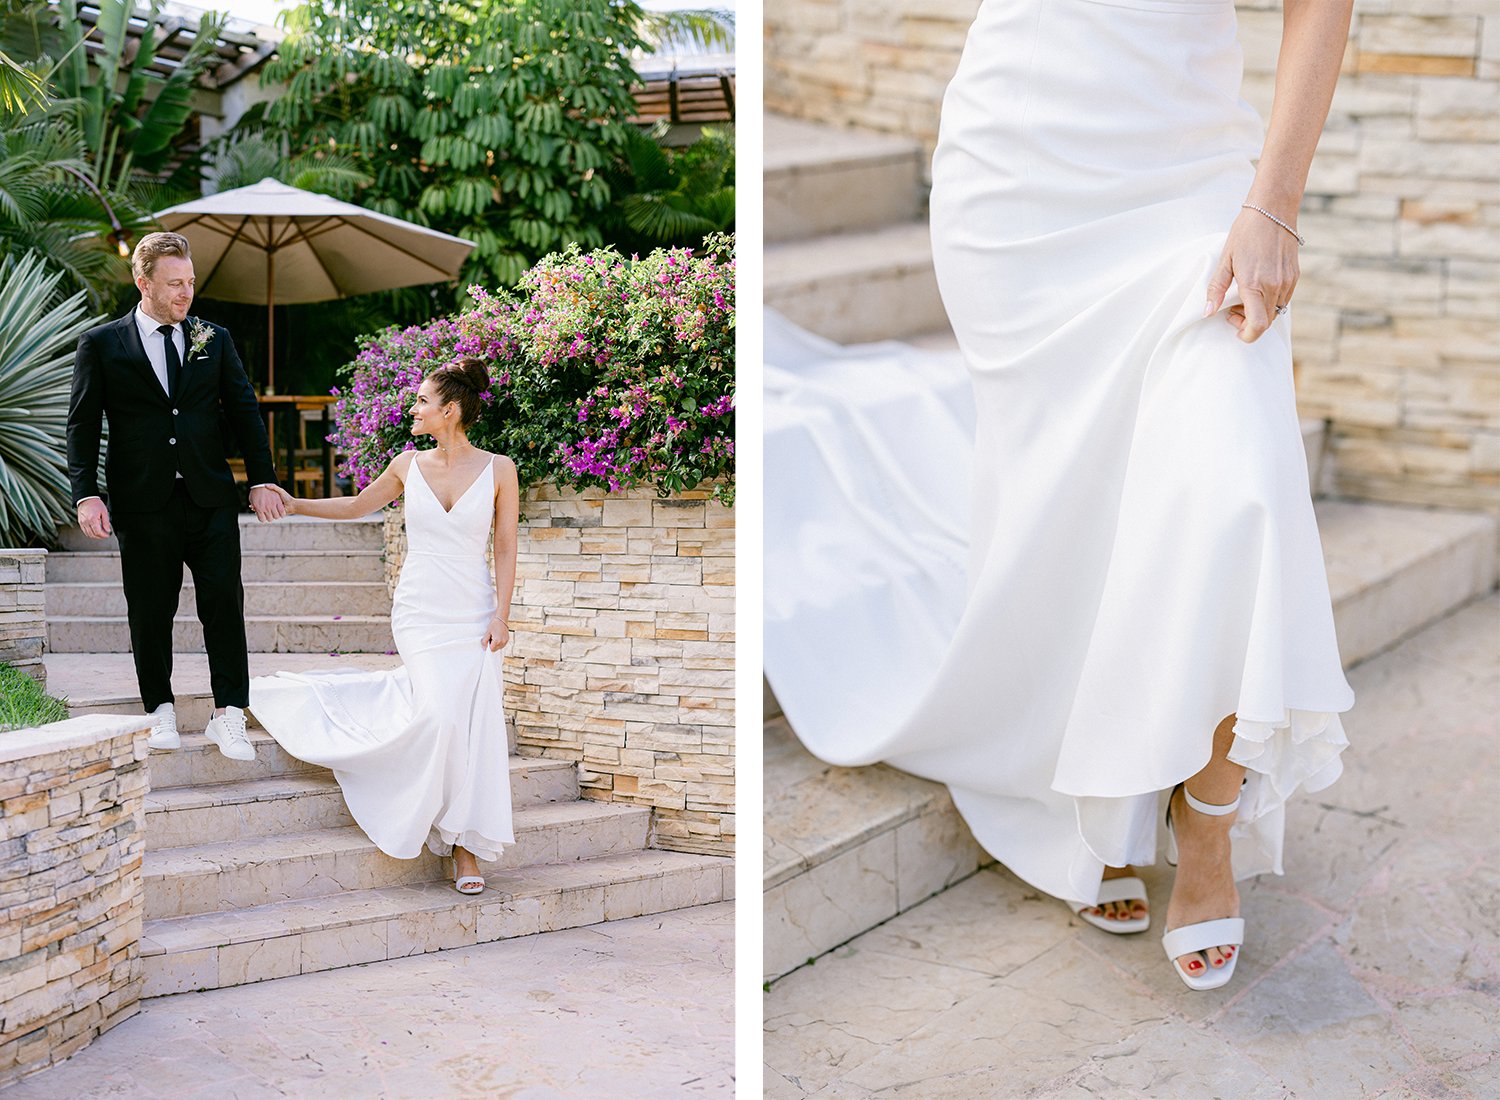 23 cute bride and groom ready for their wedding ceremony going down the stairs and detail photo of bride's shoes and her white wedding dress at Rosewood Mayakoba Riviera Maya Cancun.JPG